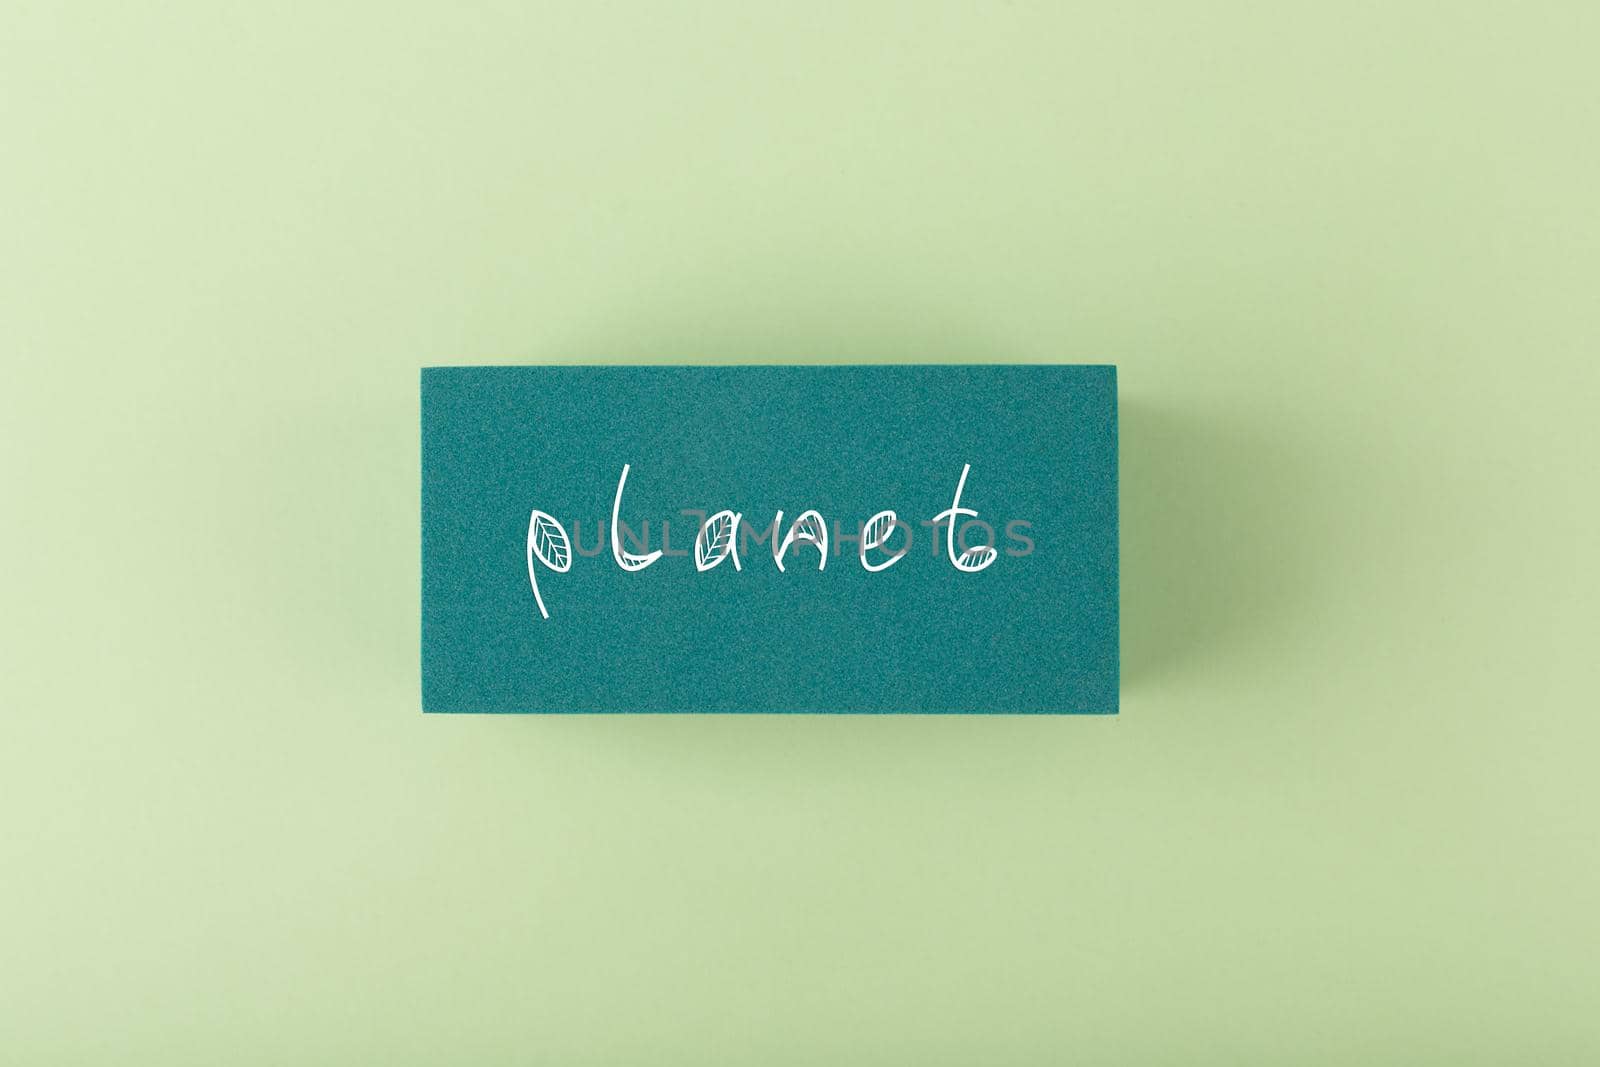 Planet handwritten on dark green rectangle against light green background. Concept of planet, eco friendly life style, plastic, pollution or ecological problems